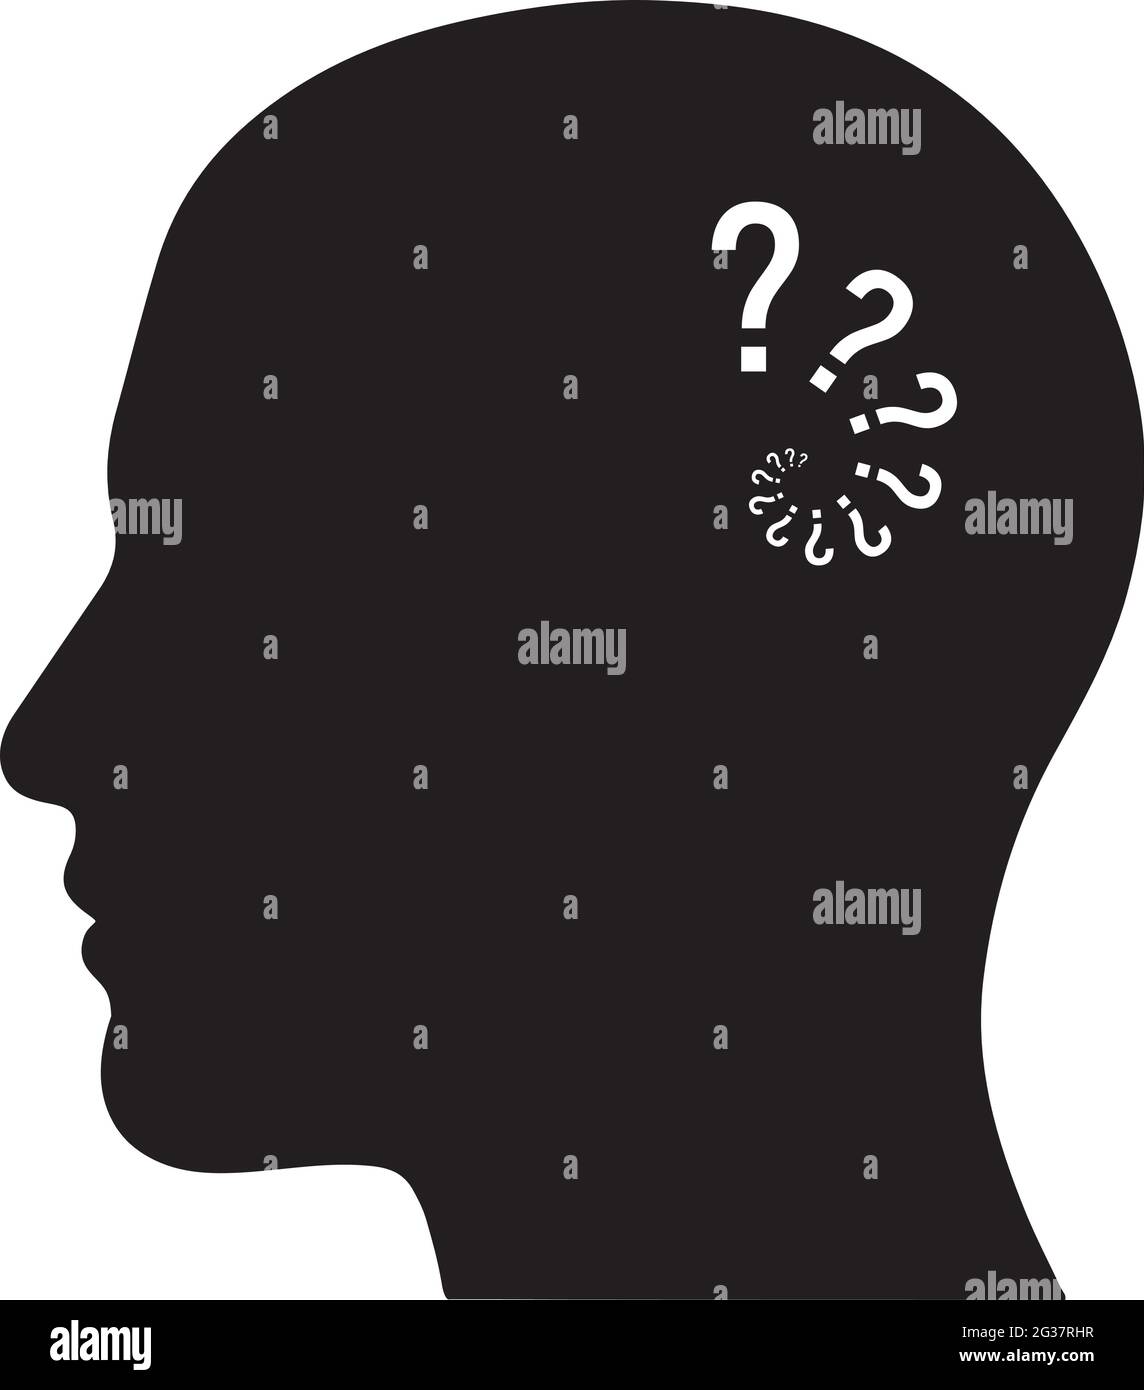 Vector illustration silhouette of Human Head with question marks indicating confusion or Alzheimers disease Stock Vector